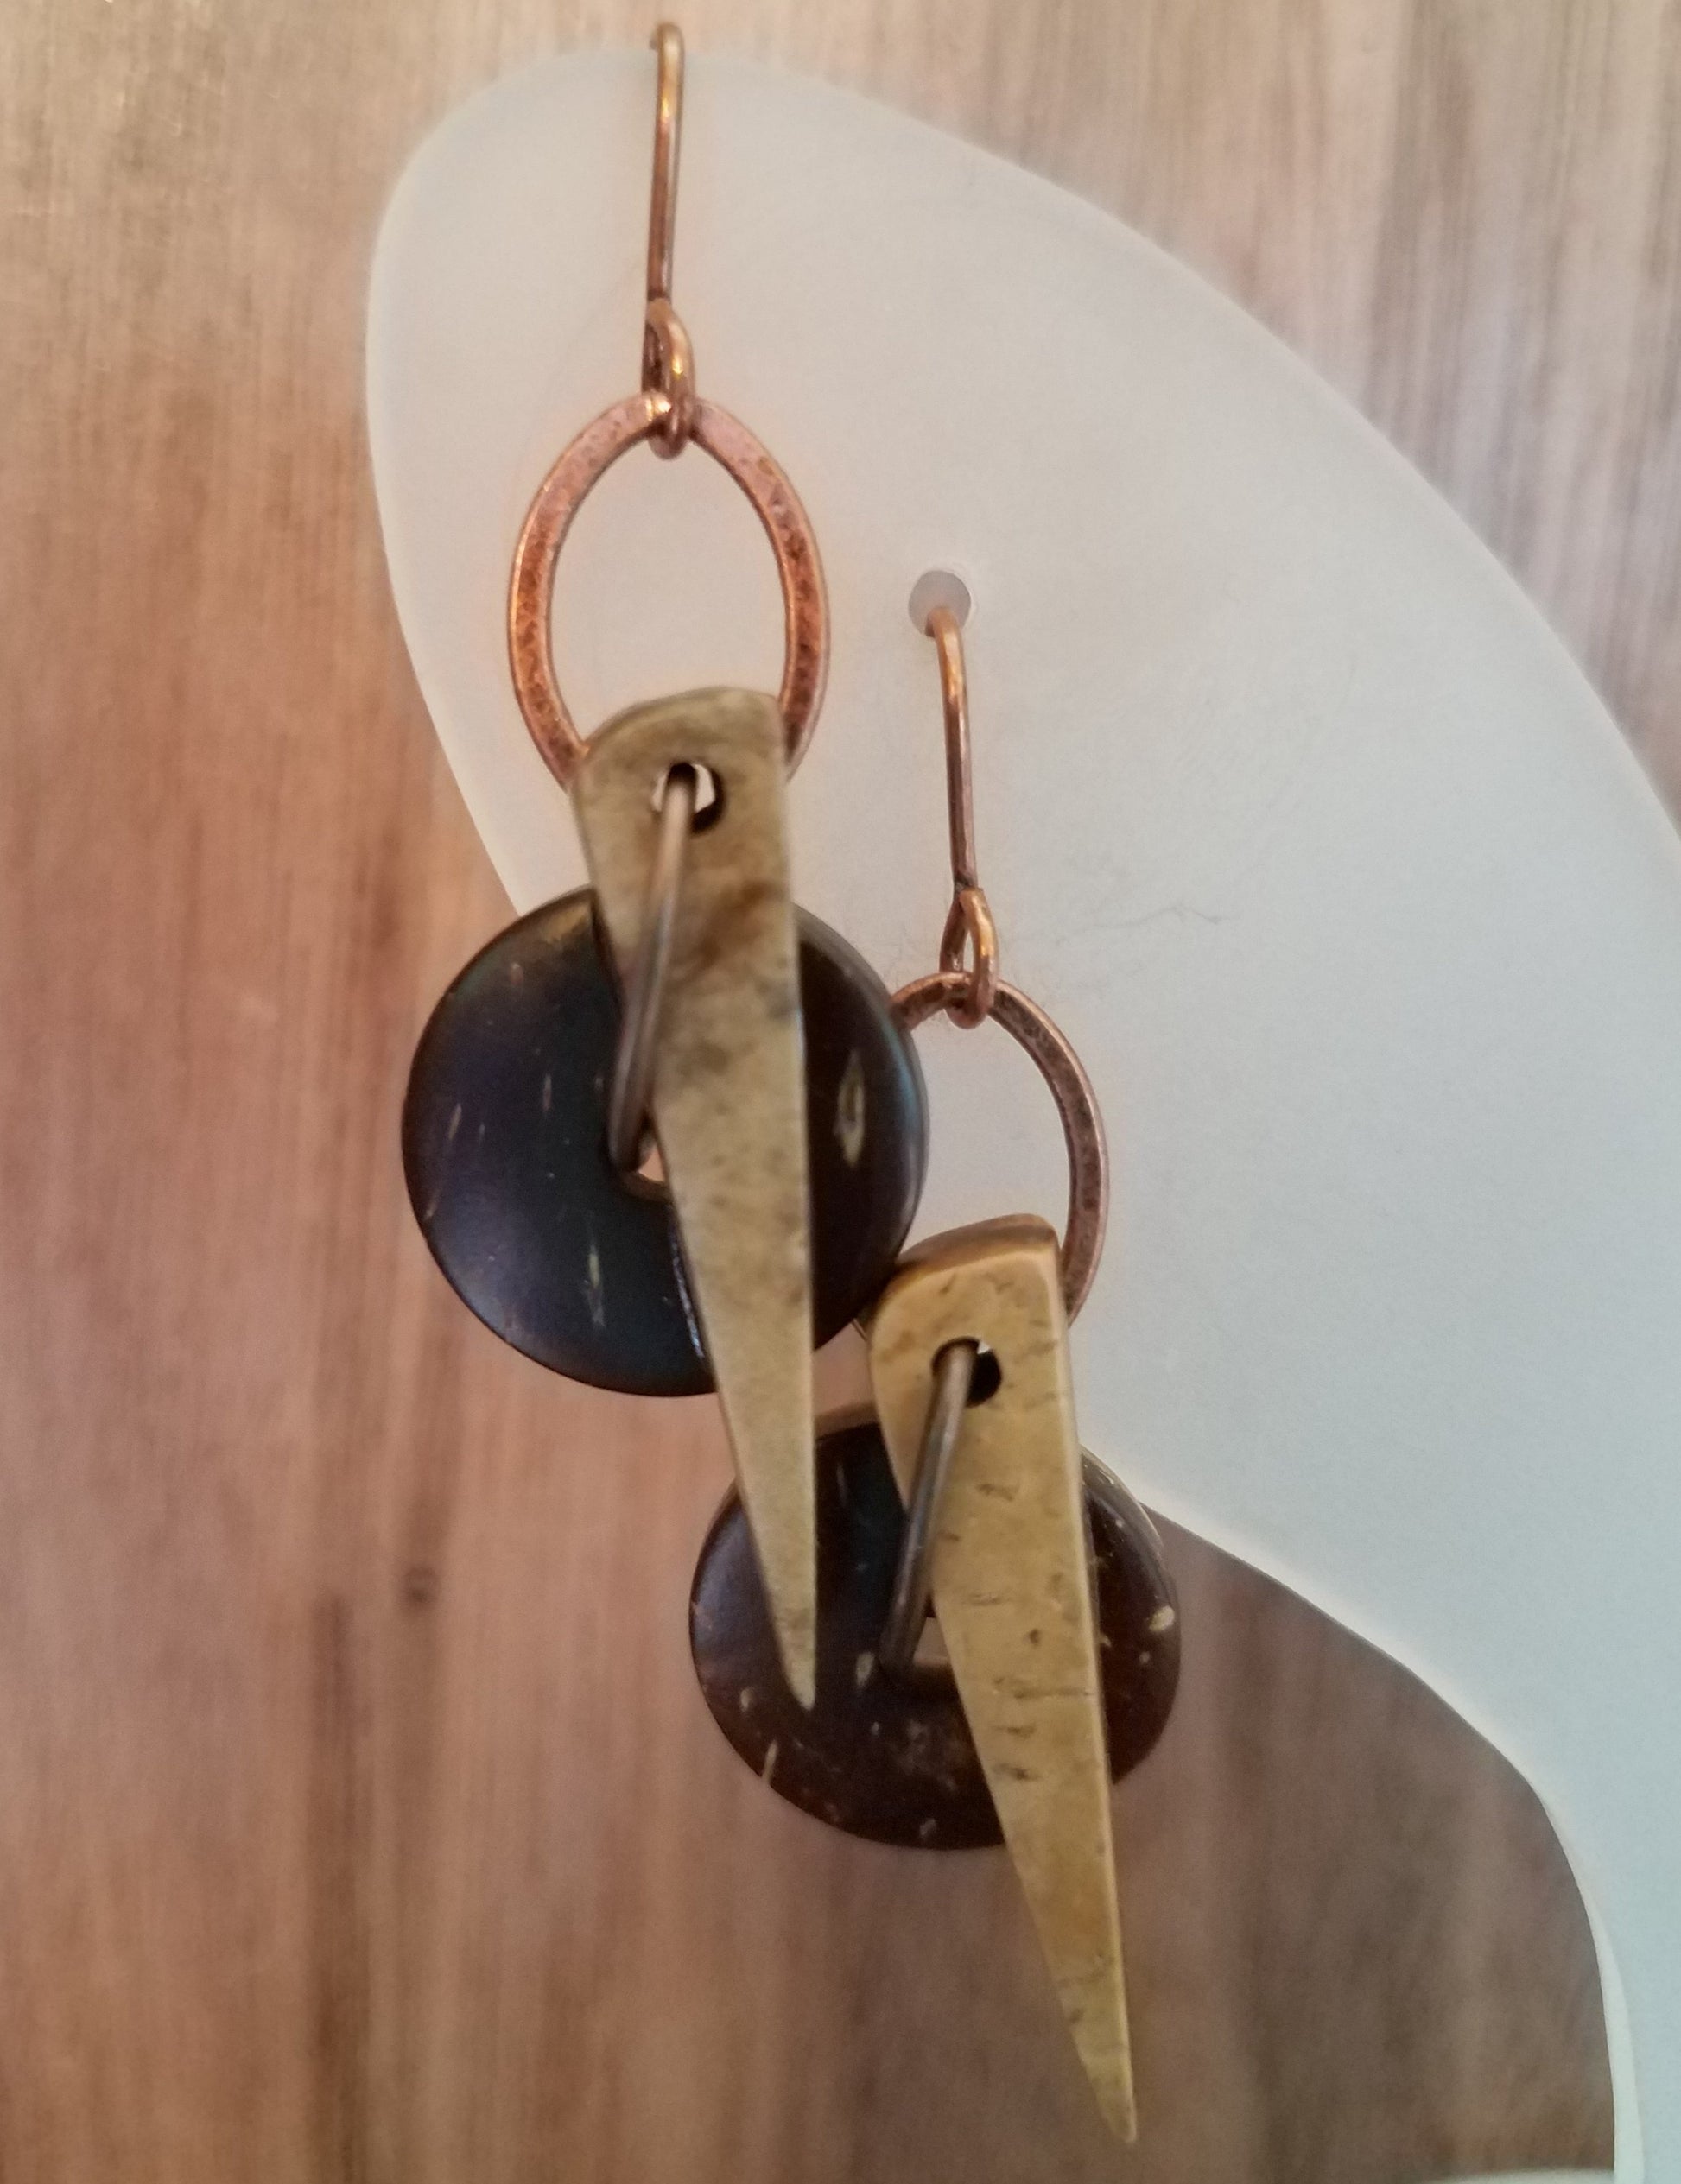 Handmade Geometric Coconut Shell Dangle Earrings Copper Upcycled Repurposed Circle Triangle Natural Asymmetric Lightweight